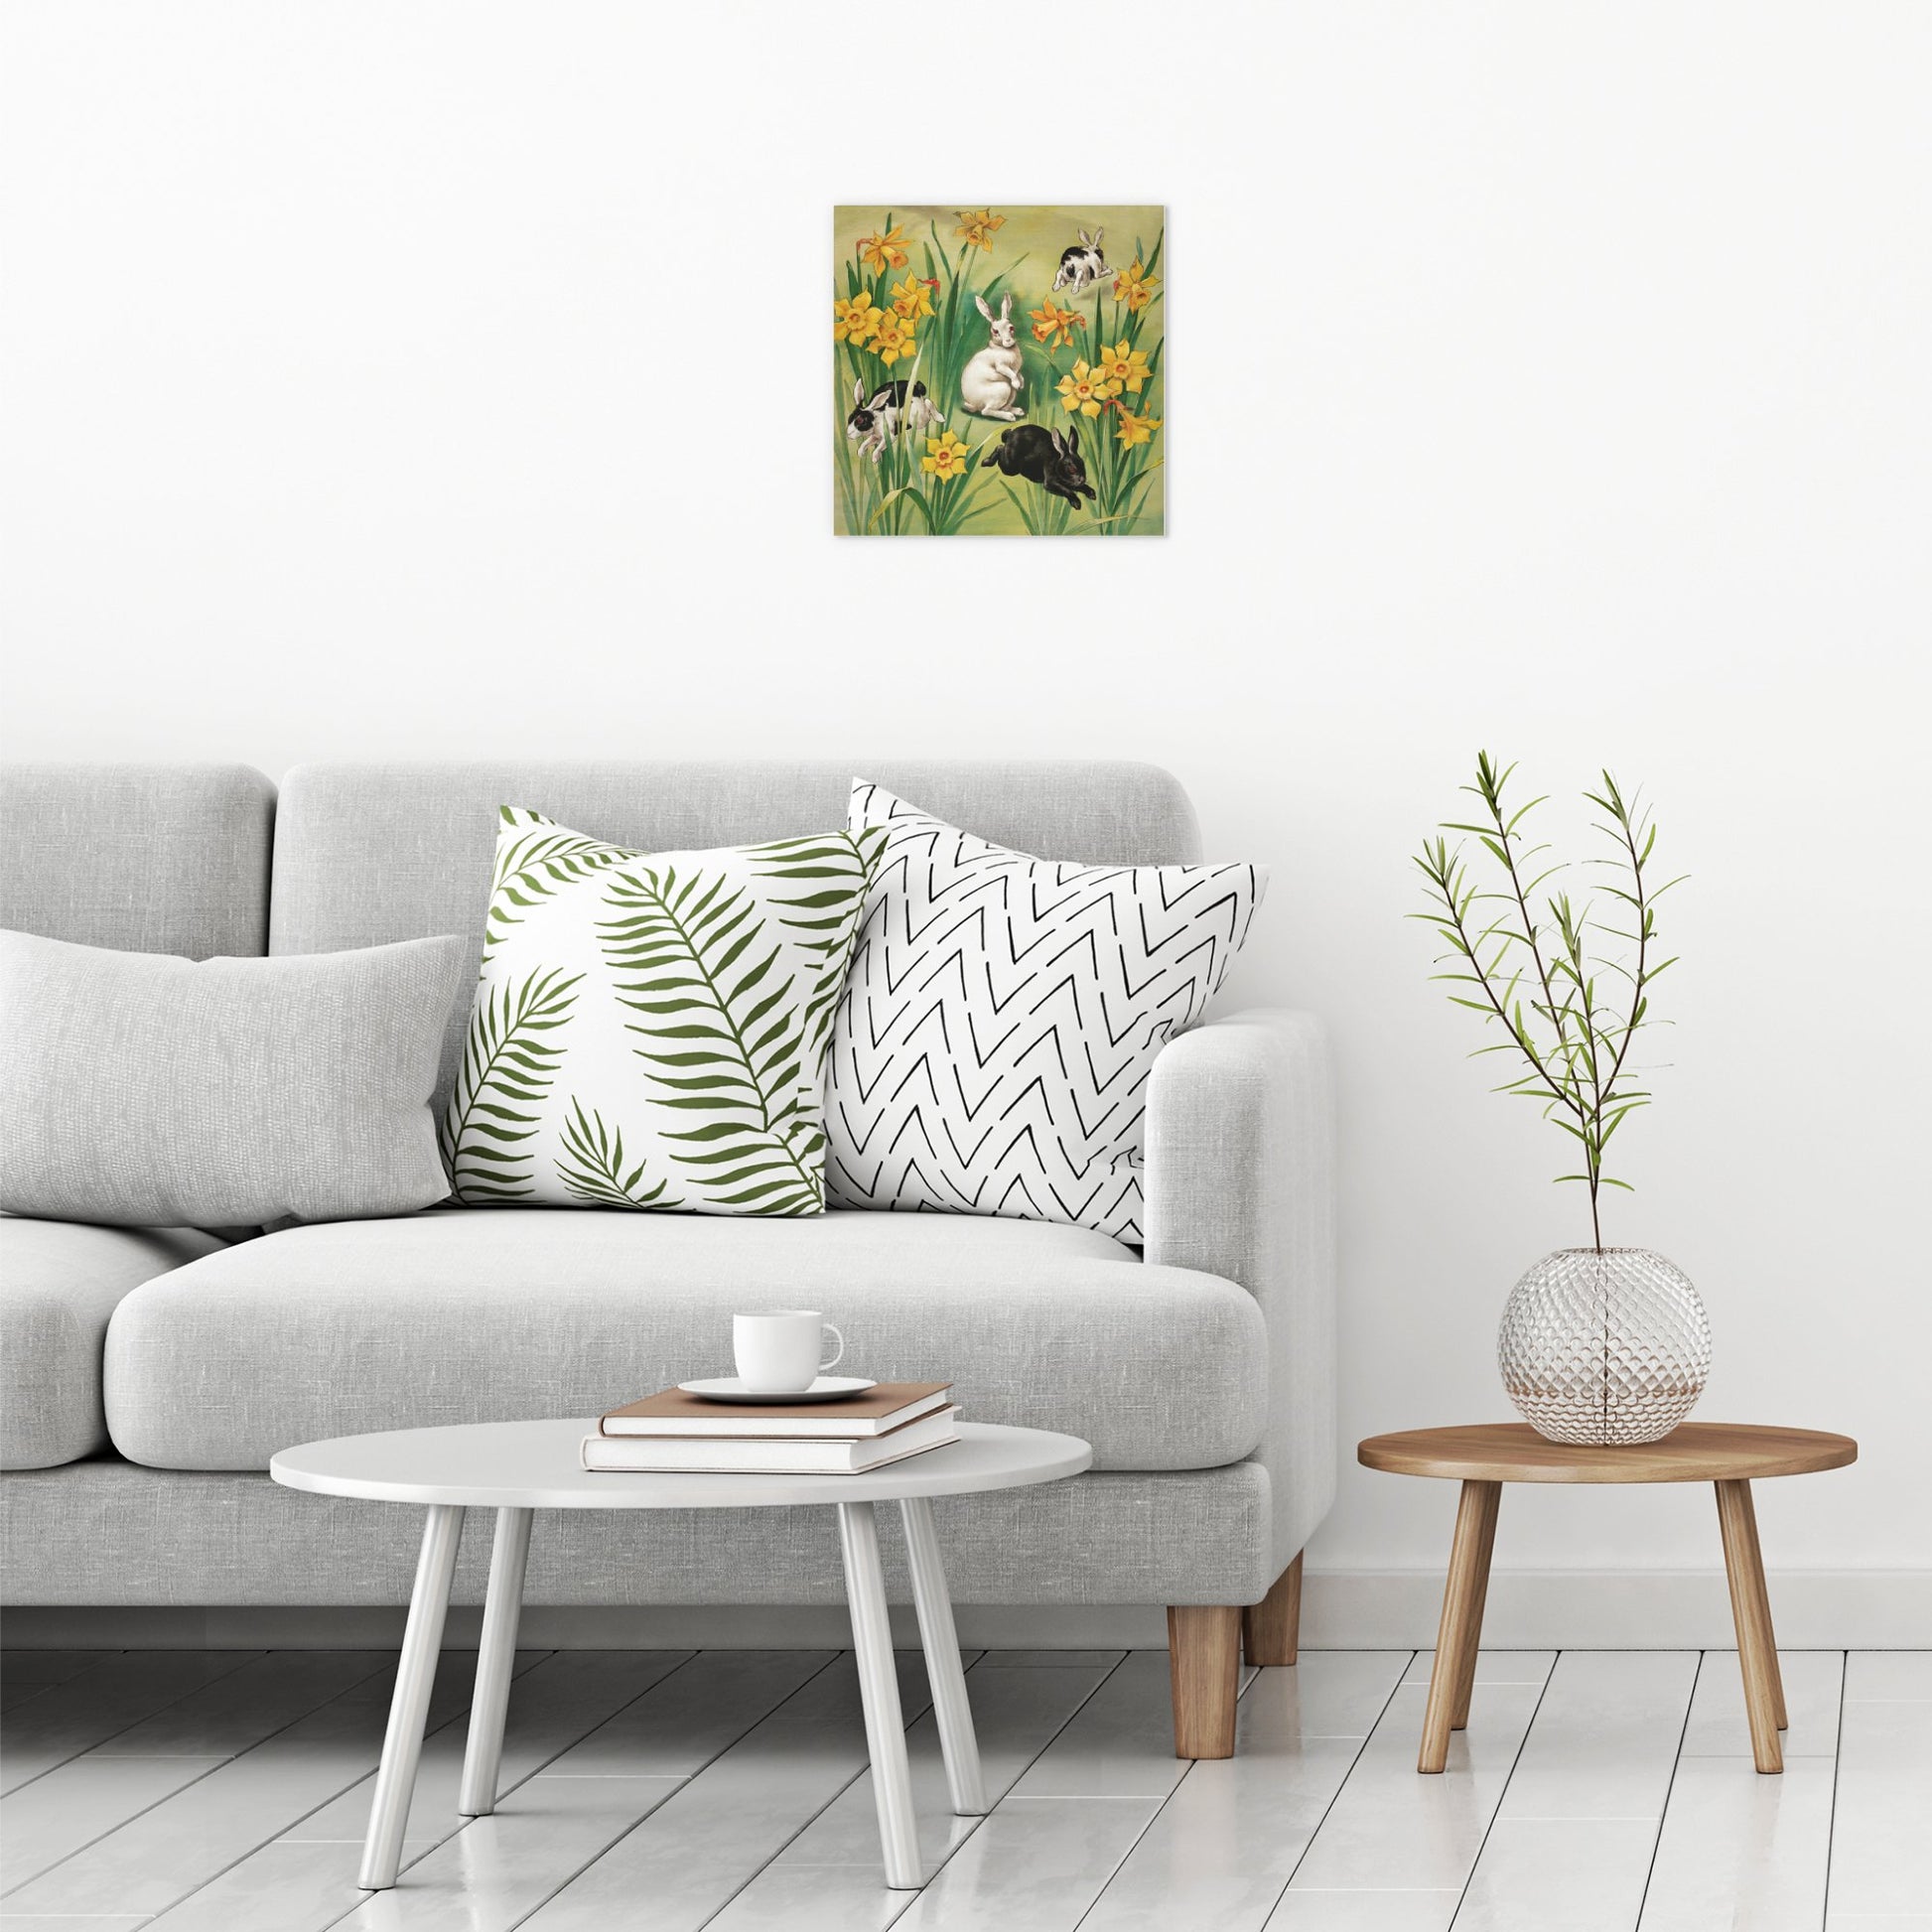 A contemporary modern room view showing a medium size metal art poster display plate with printed design of a Bunnies and Daffodils Vintage Illustration